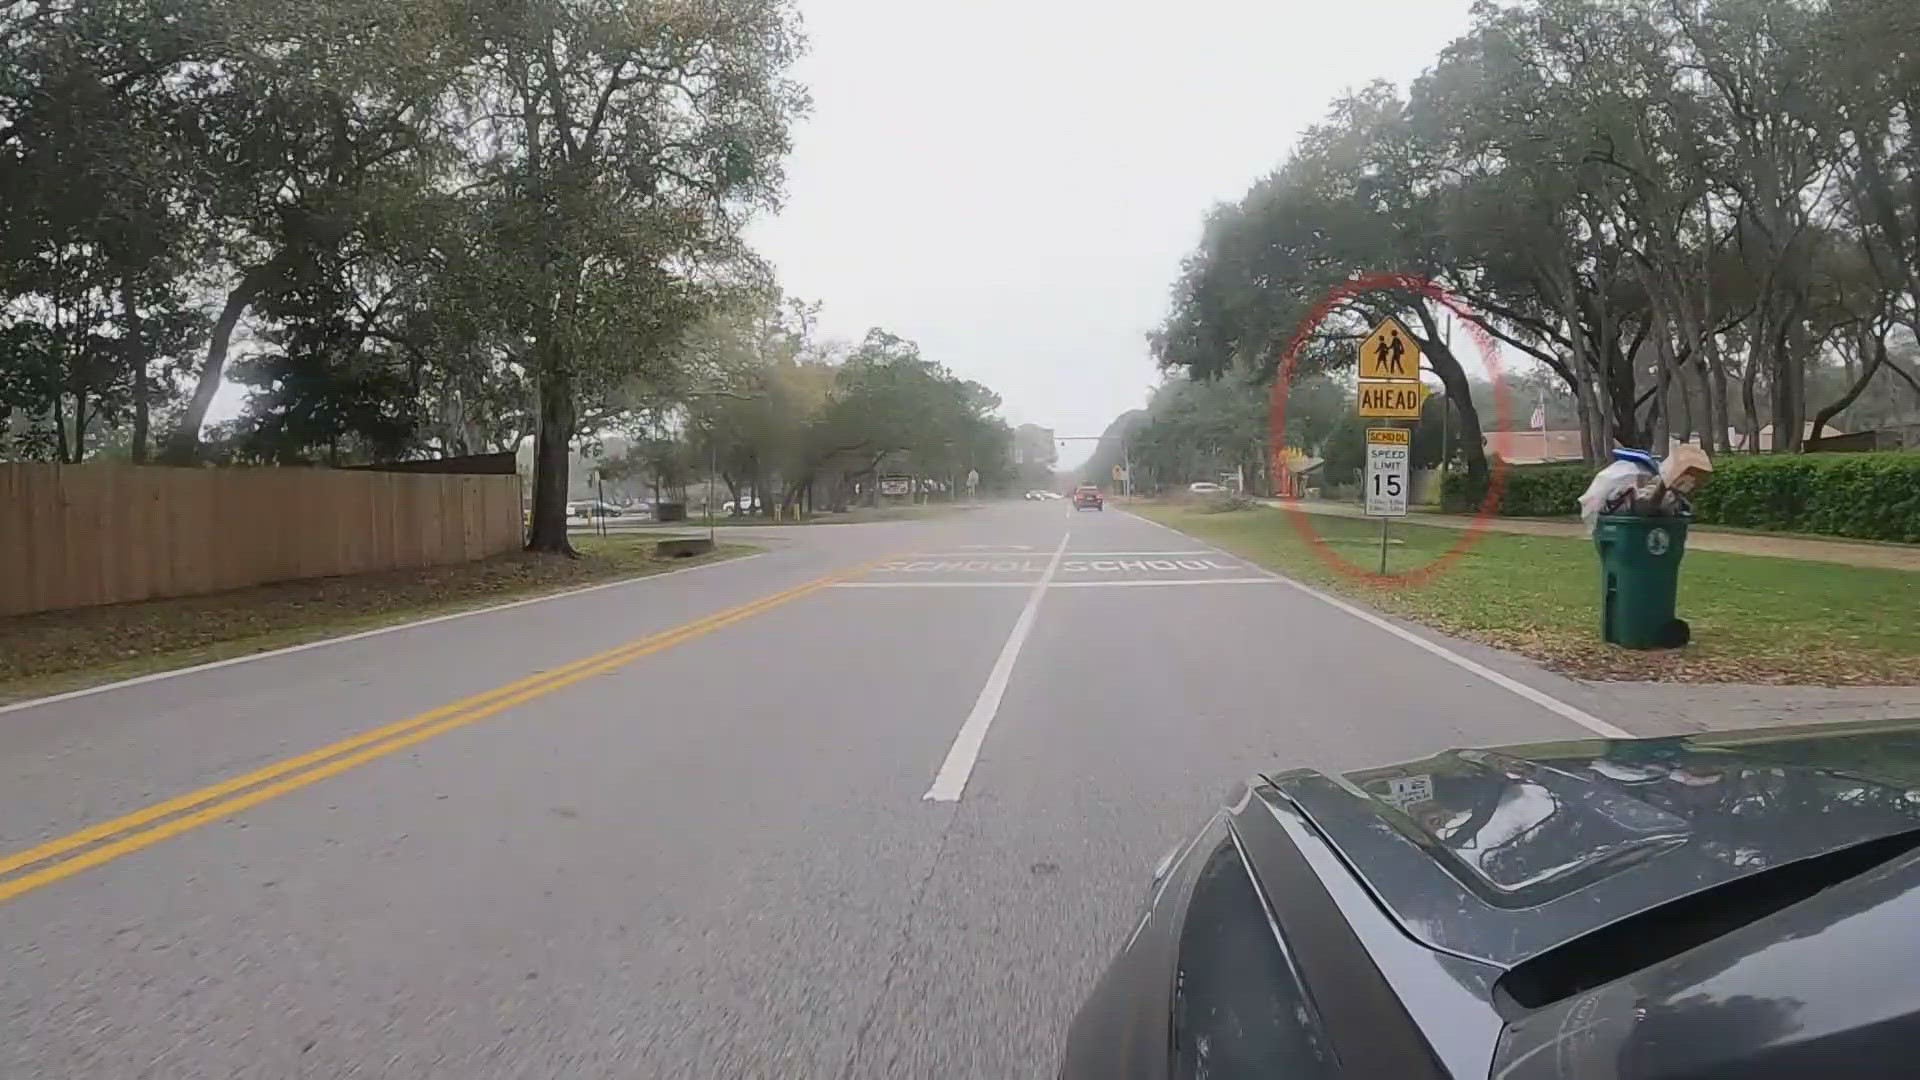 The city council passed an ordinance allowing for speed monitors to issue automated tickets in school zones.